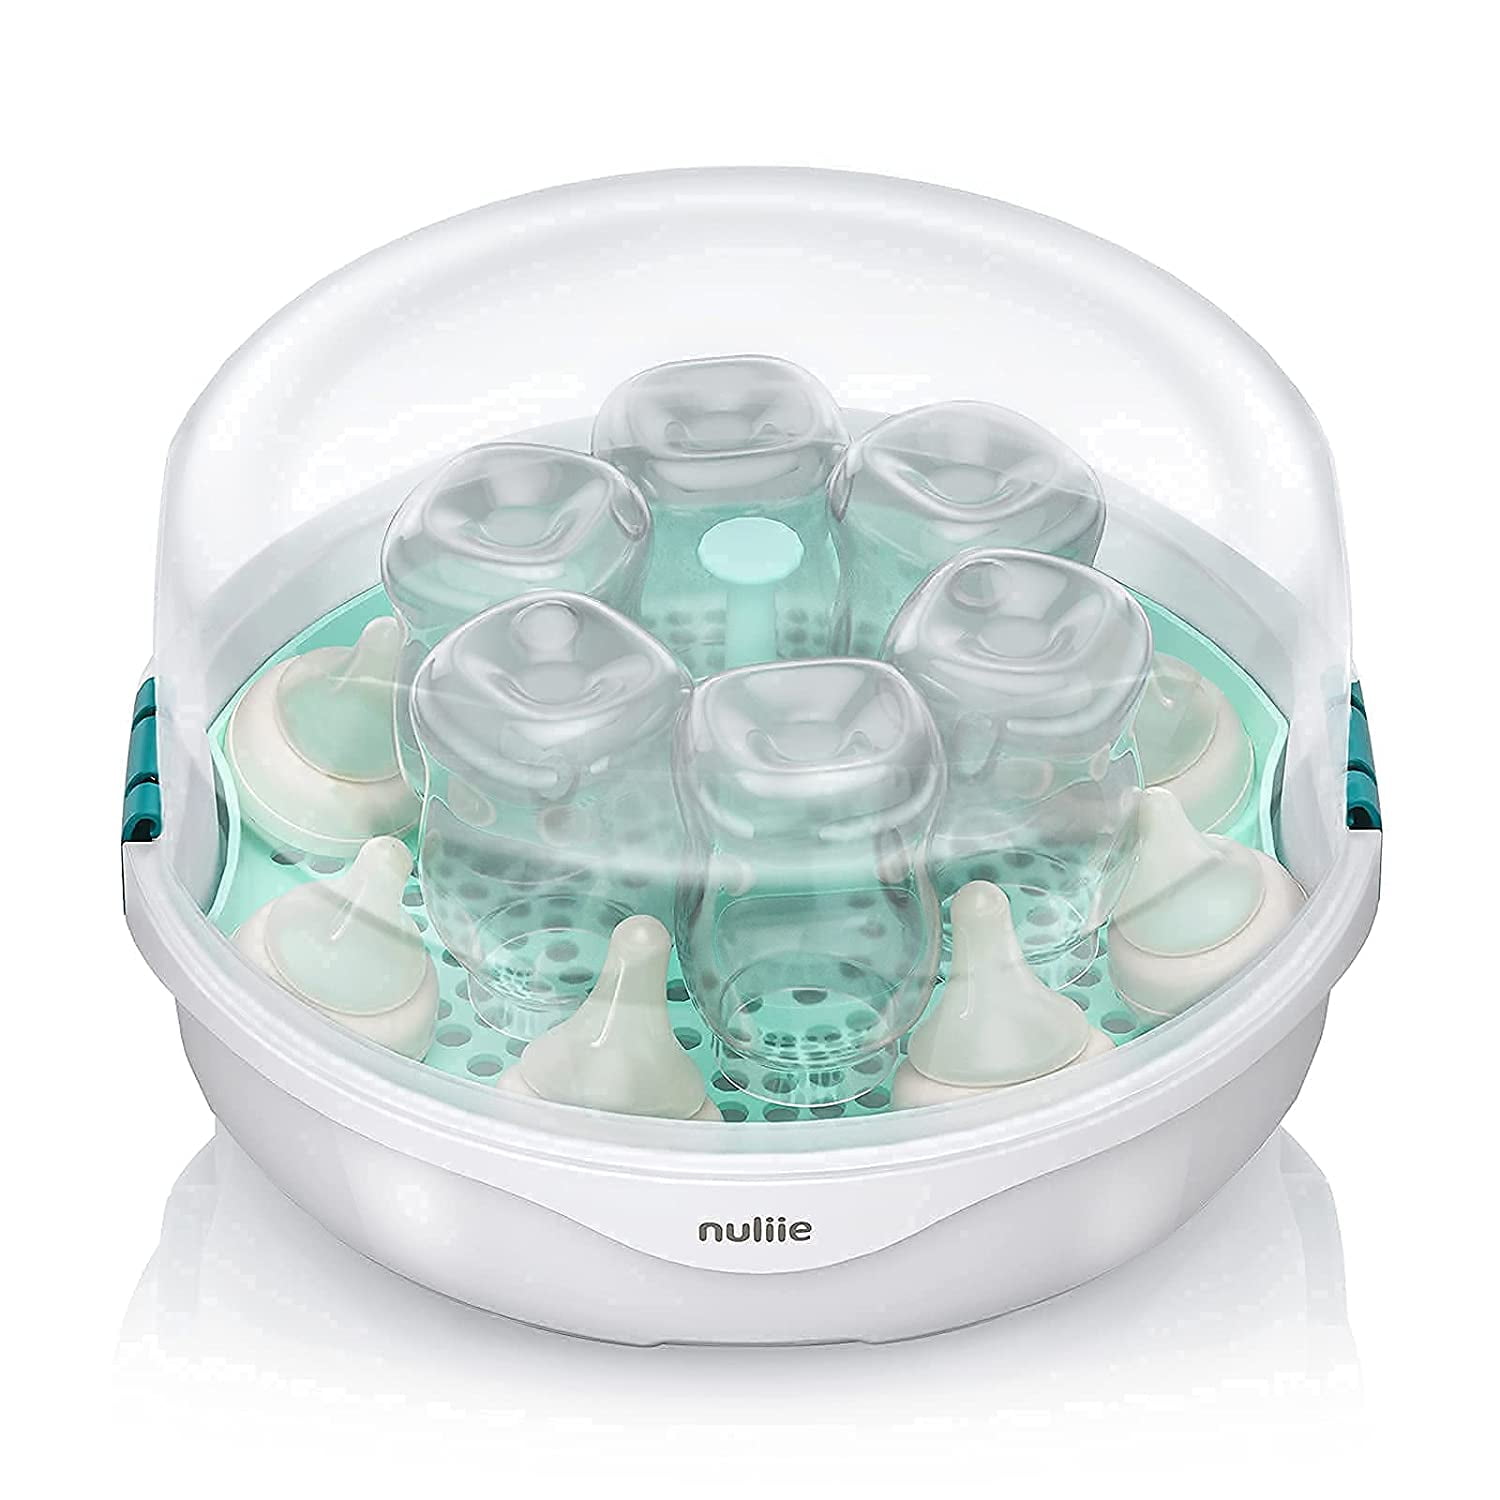 Tommee Tippee Cold Water 2 in 1 Baby Bottle Microwave Sterilizer Compact New 